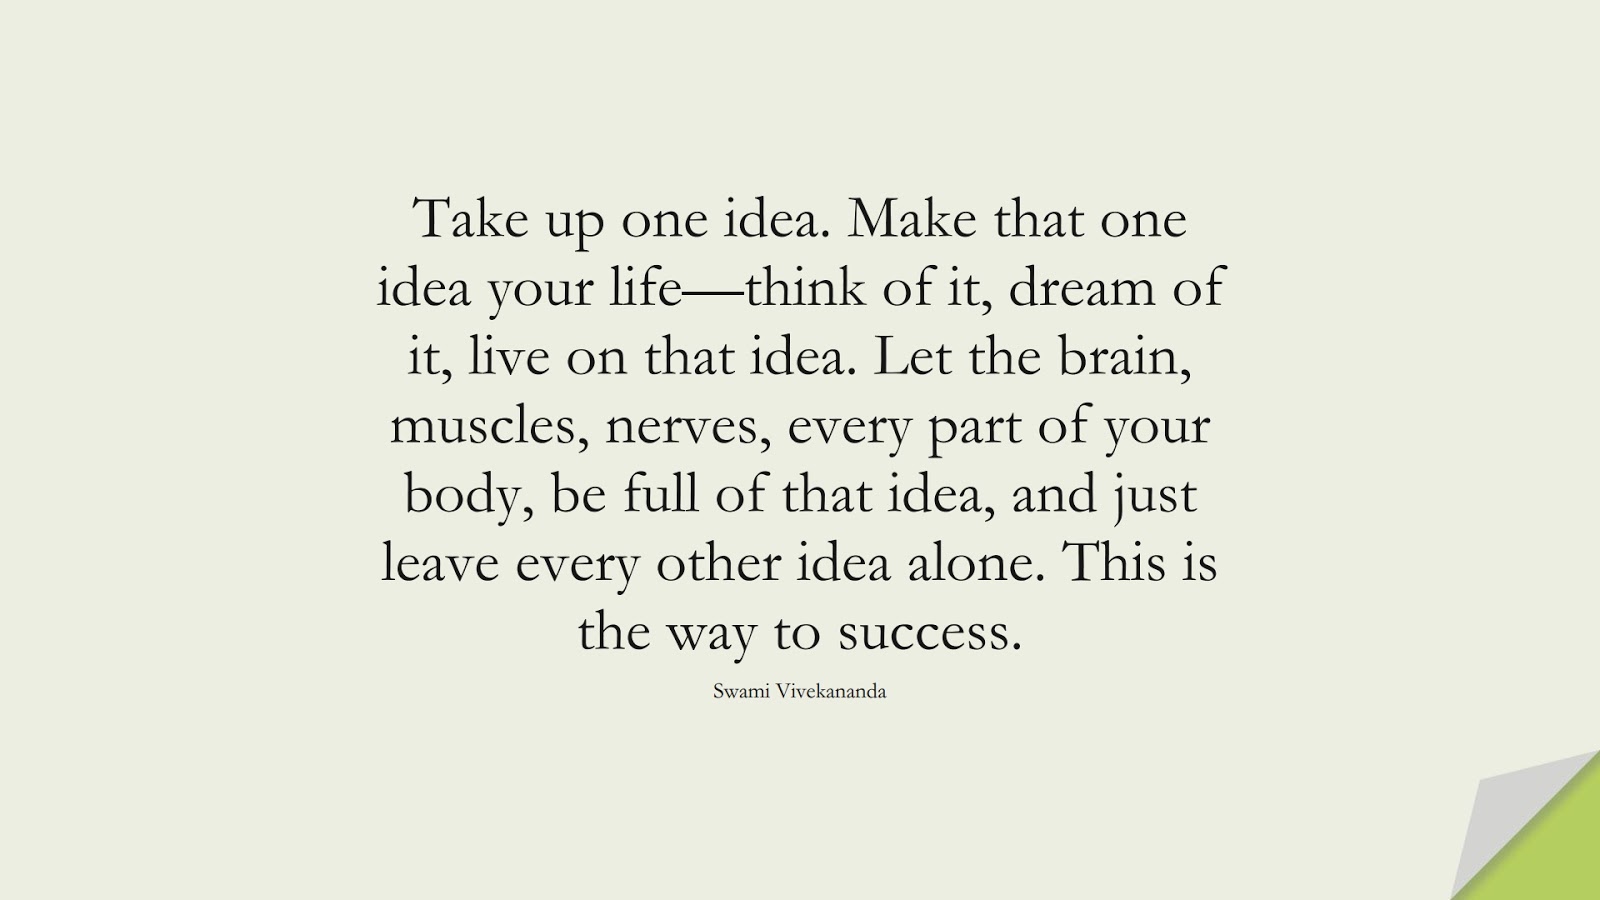 Take up one idea. Make that one idea your life—think of it, dream of it, live on that idea. Let the brain, muscles, nerves, every part of your body, be full of that idea, and just leave every other idea alone. This is the way to success. (Swami Vivekananda);  #MotivationalQuotes